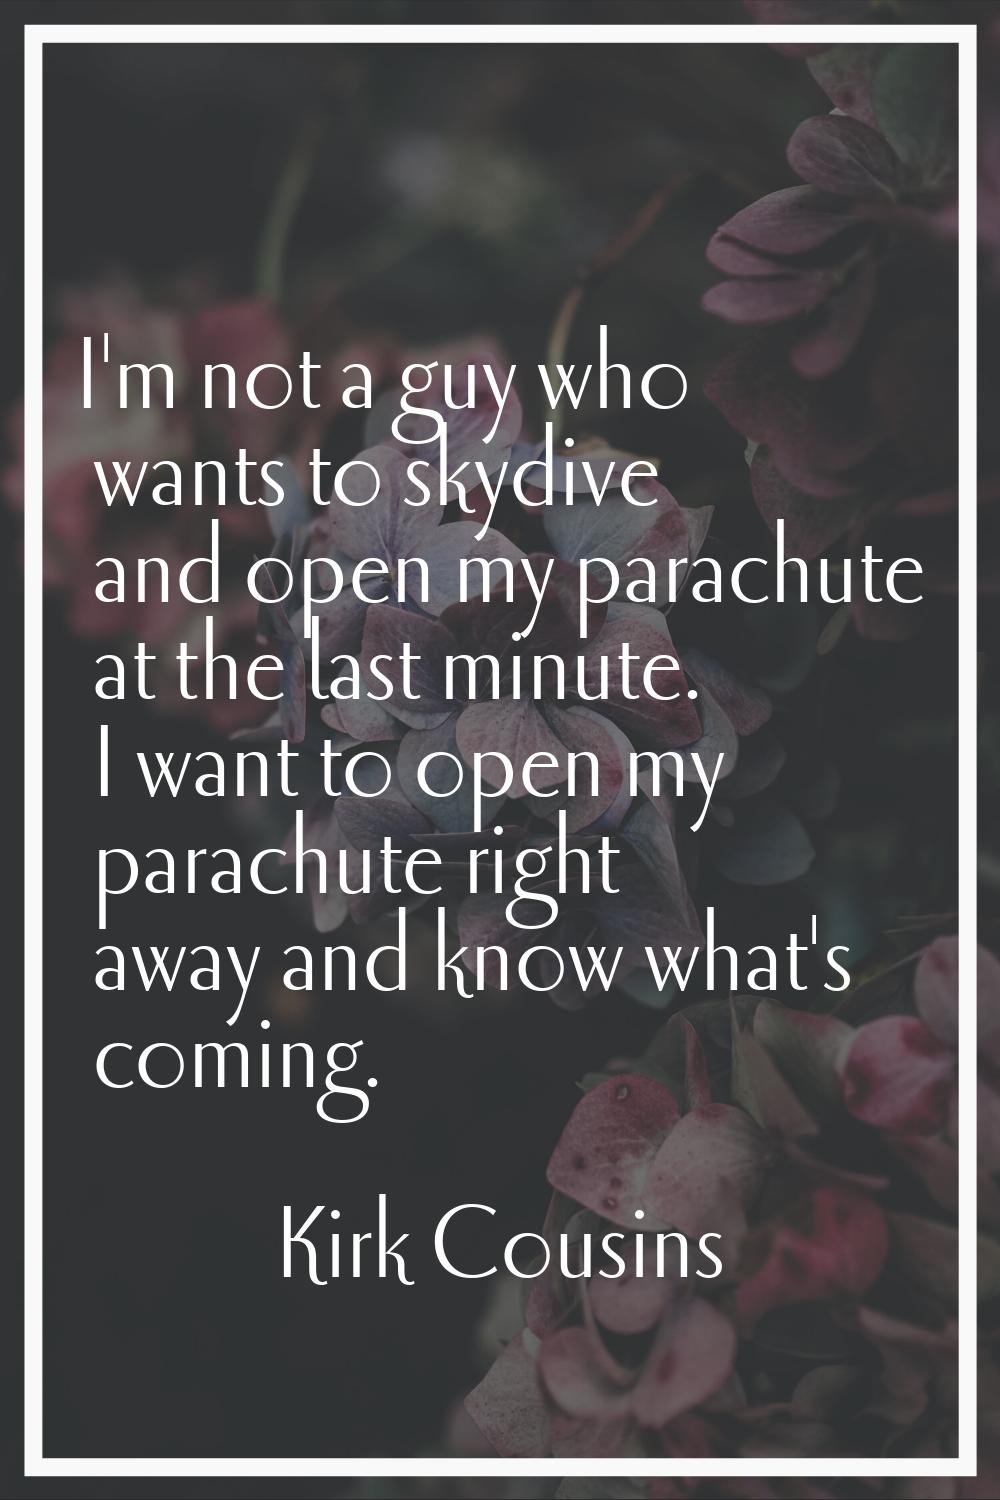 I'm not a guy who wants to skydive and open my parachute at the last minute. I want to open my para